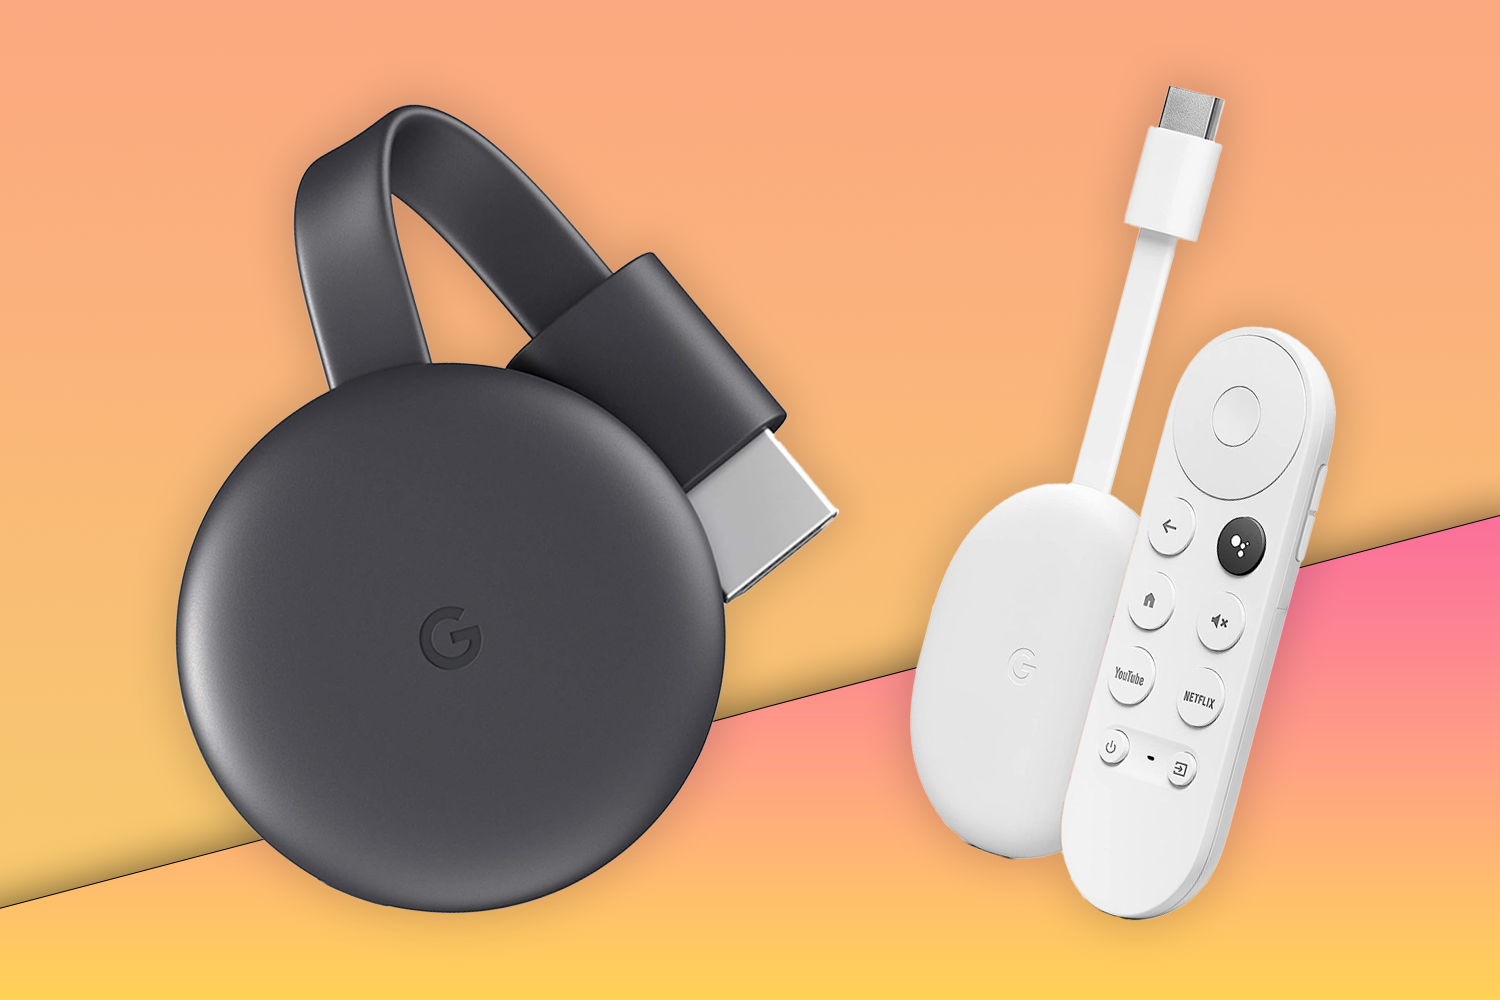 How To Set Up Your Chromecast With Google TV (2023)